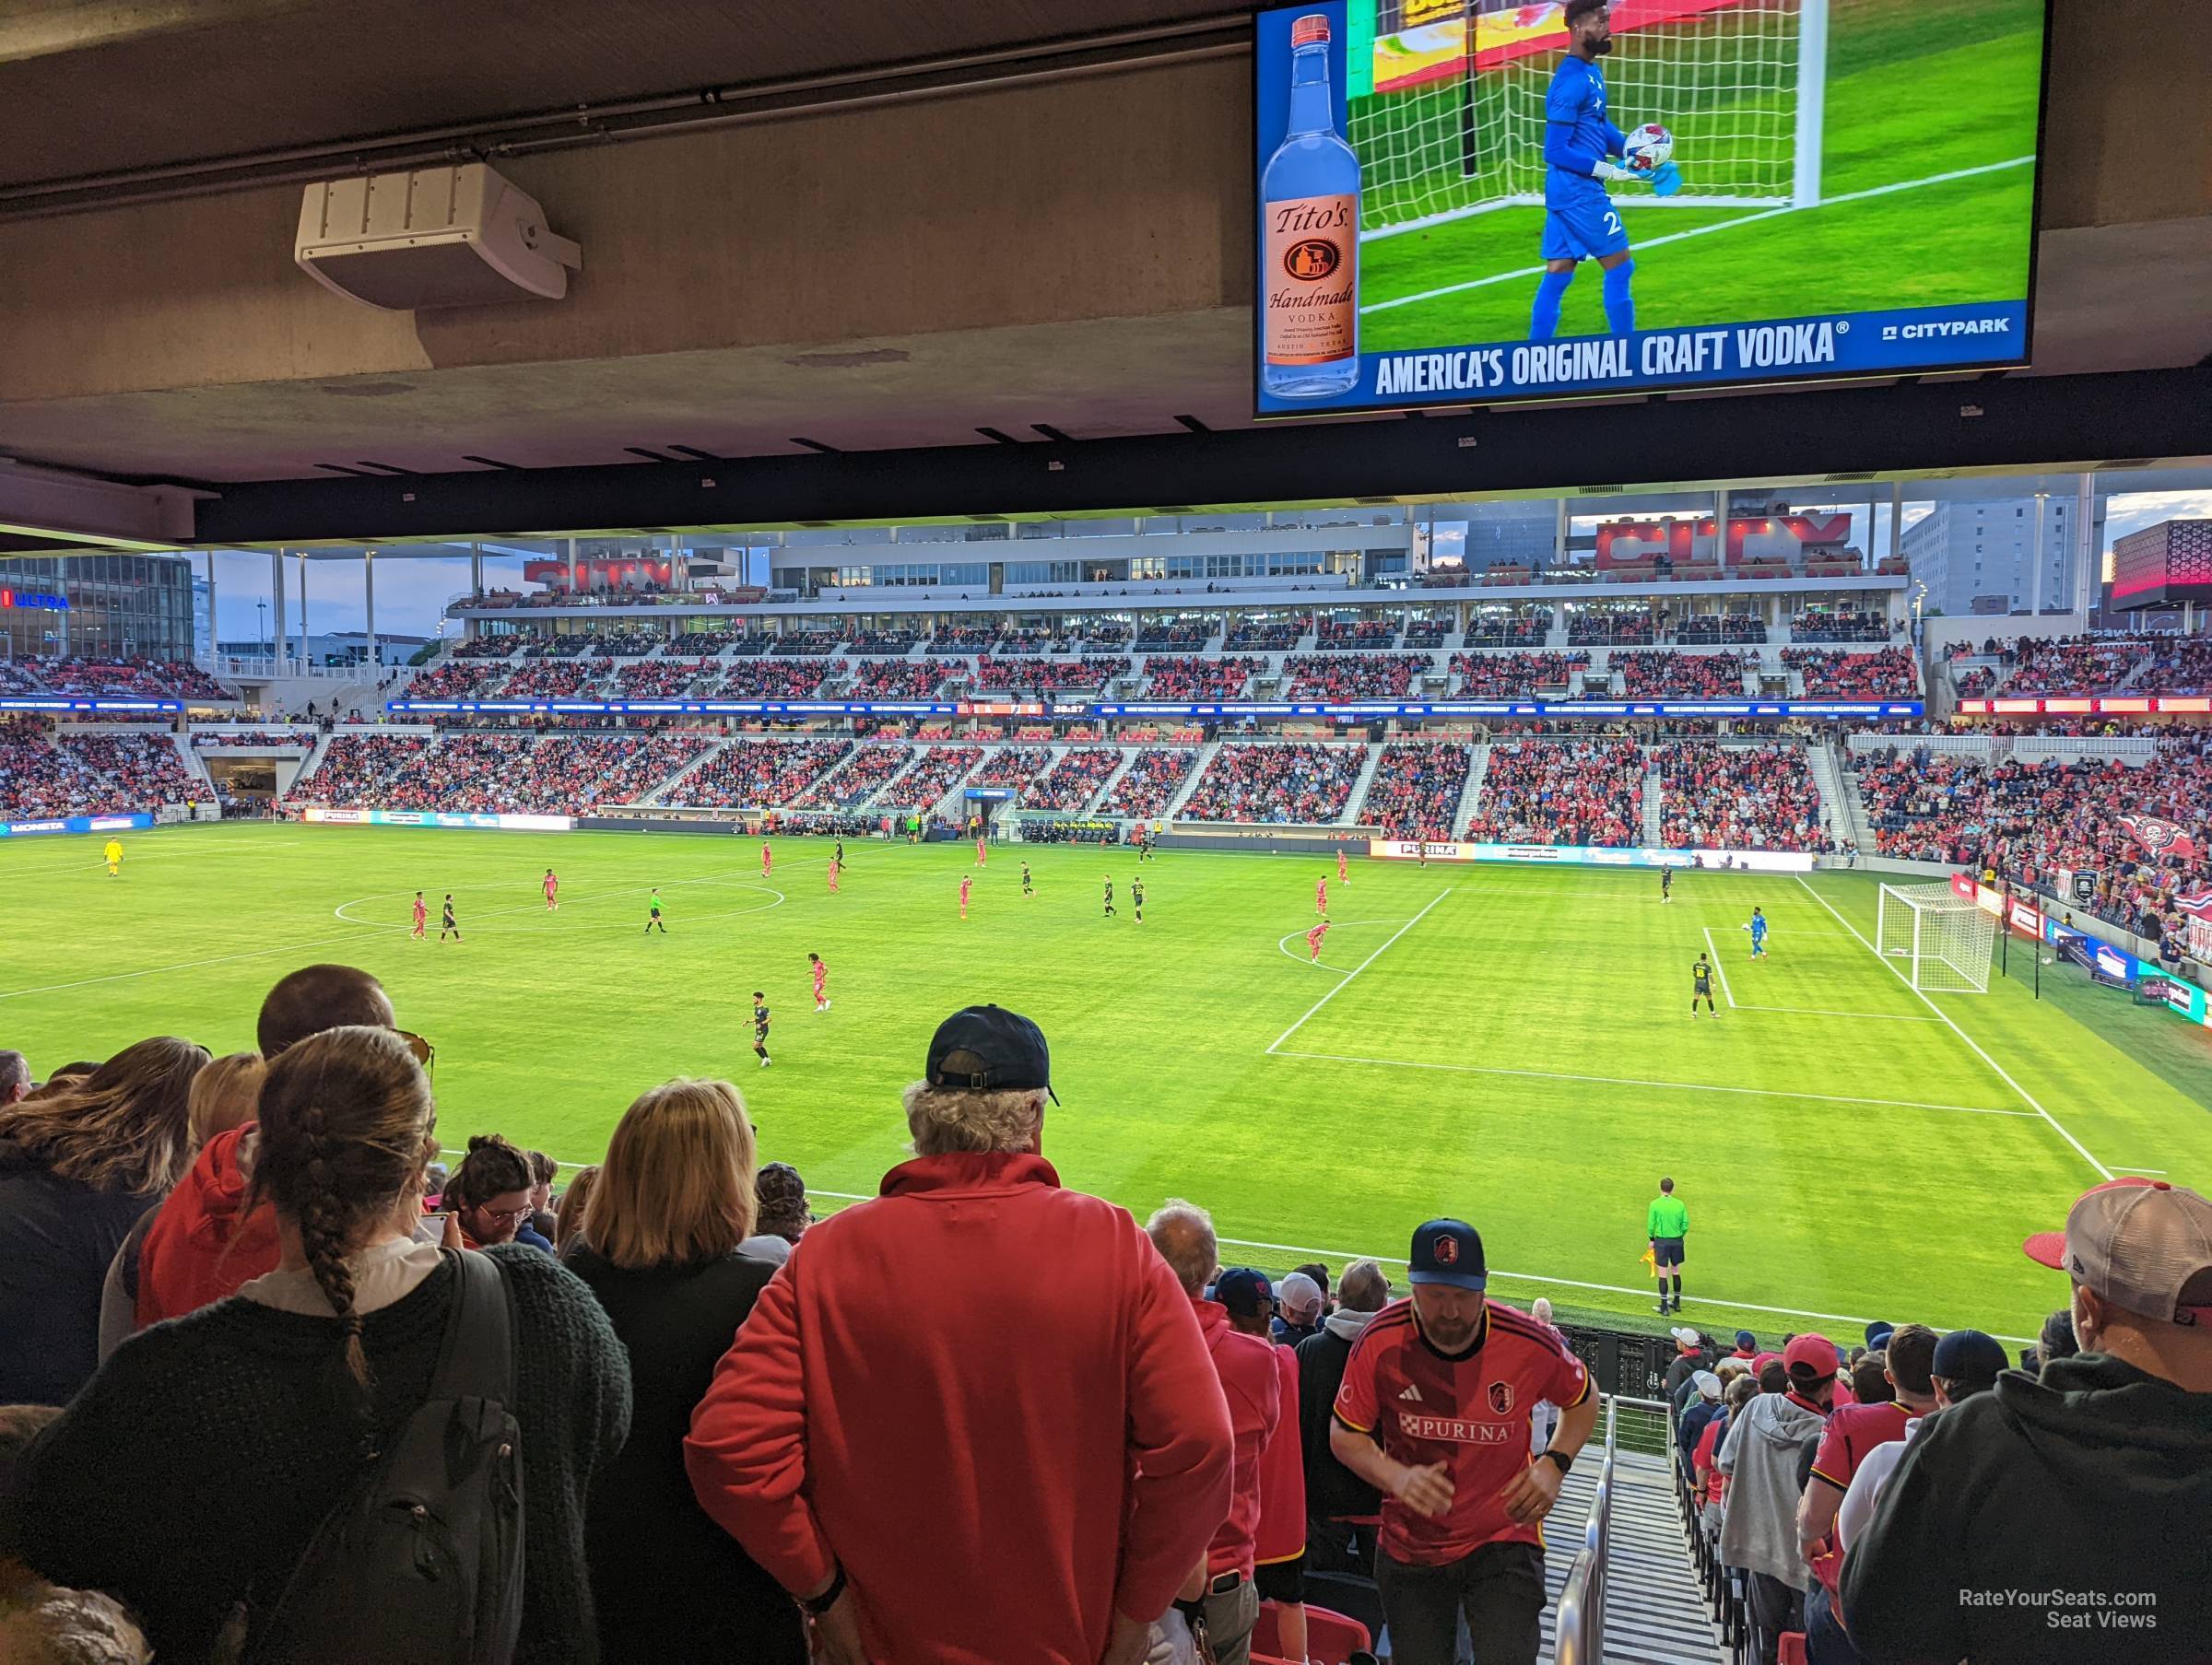 section 109, row 20 seat view  - citypark